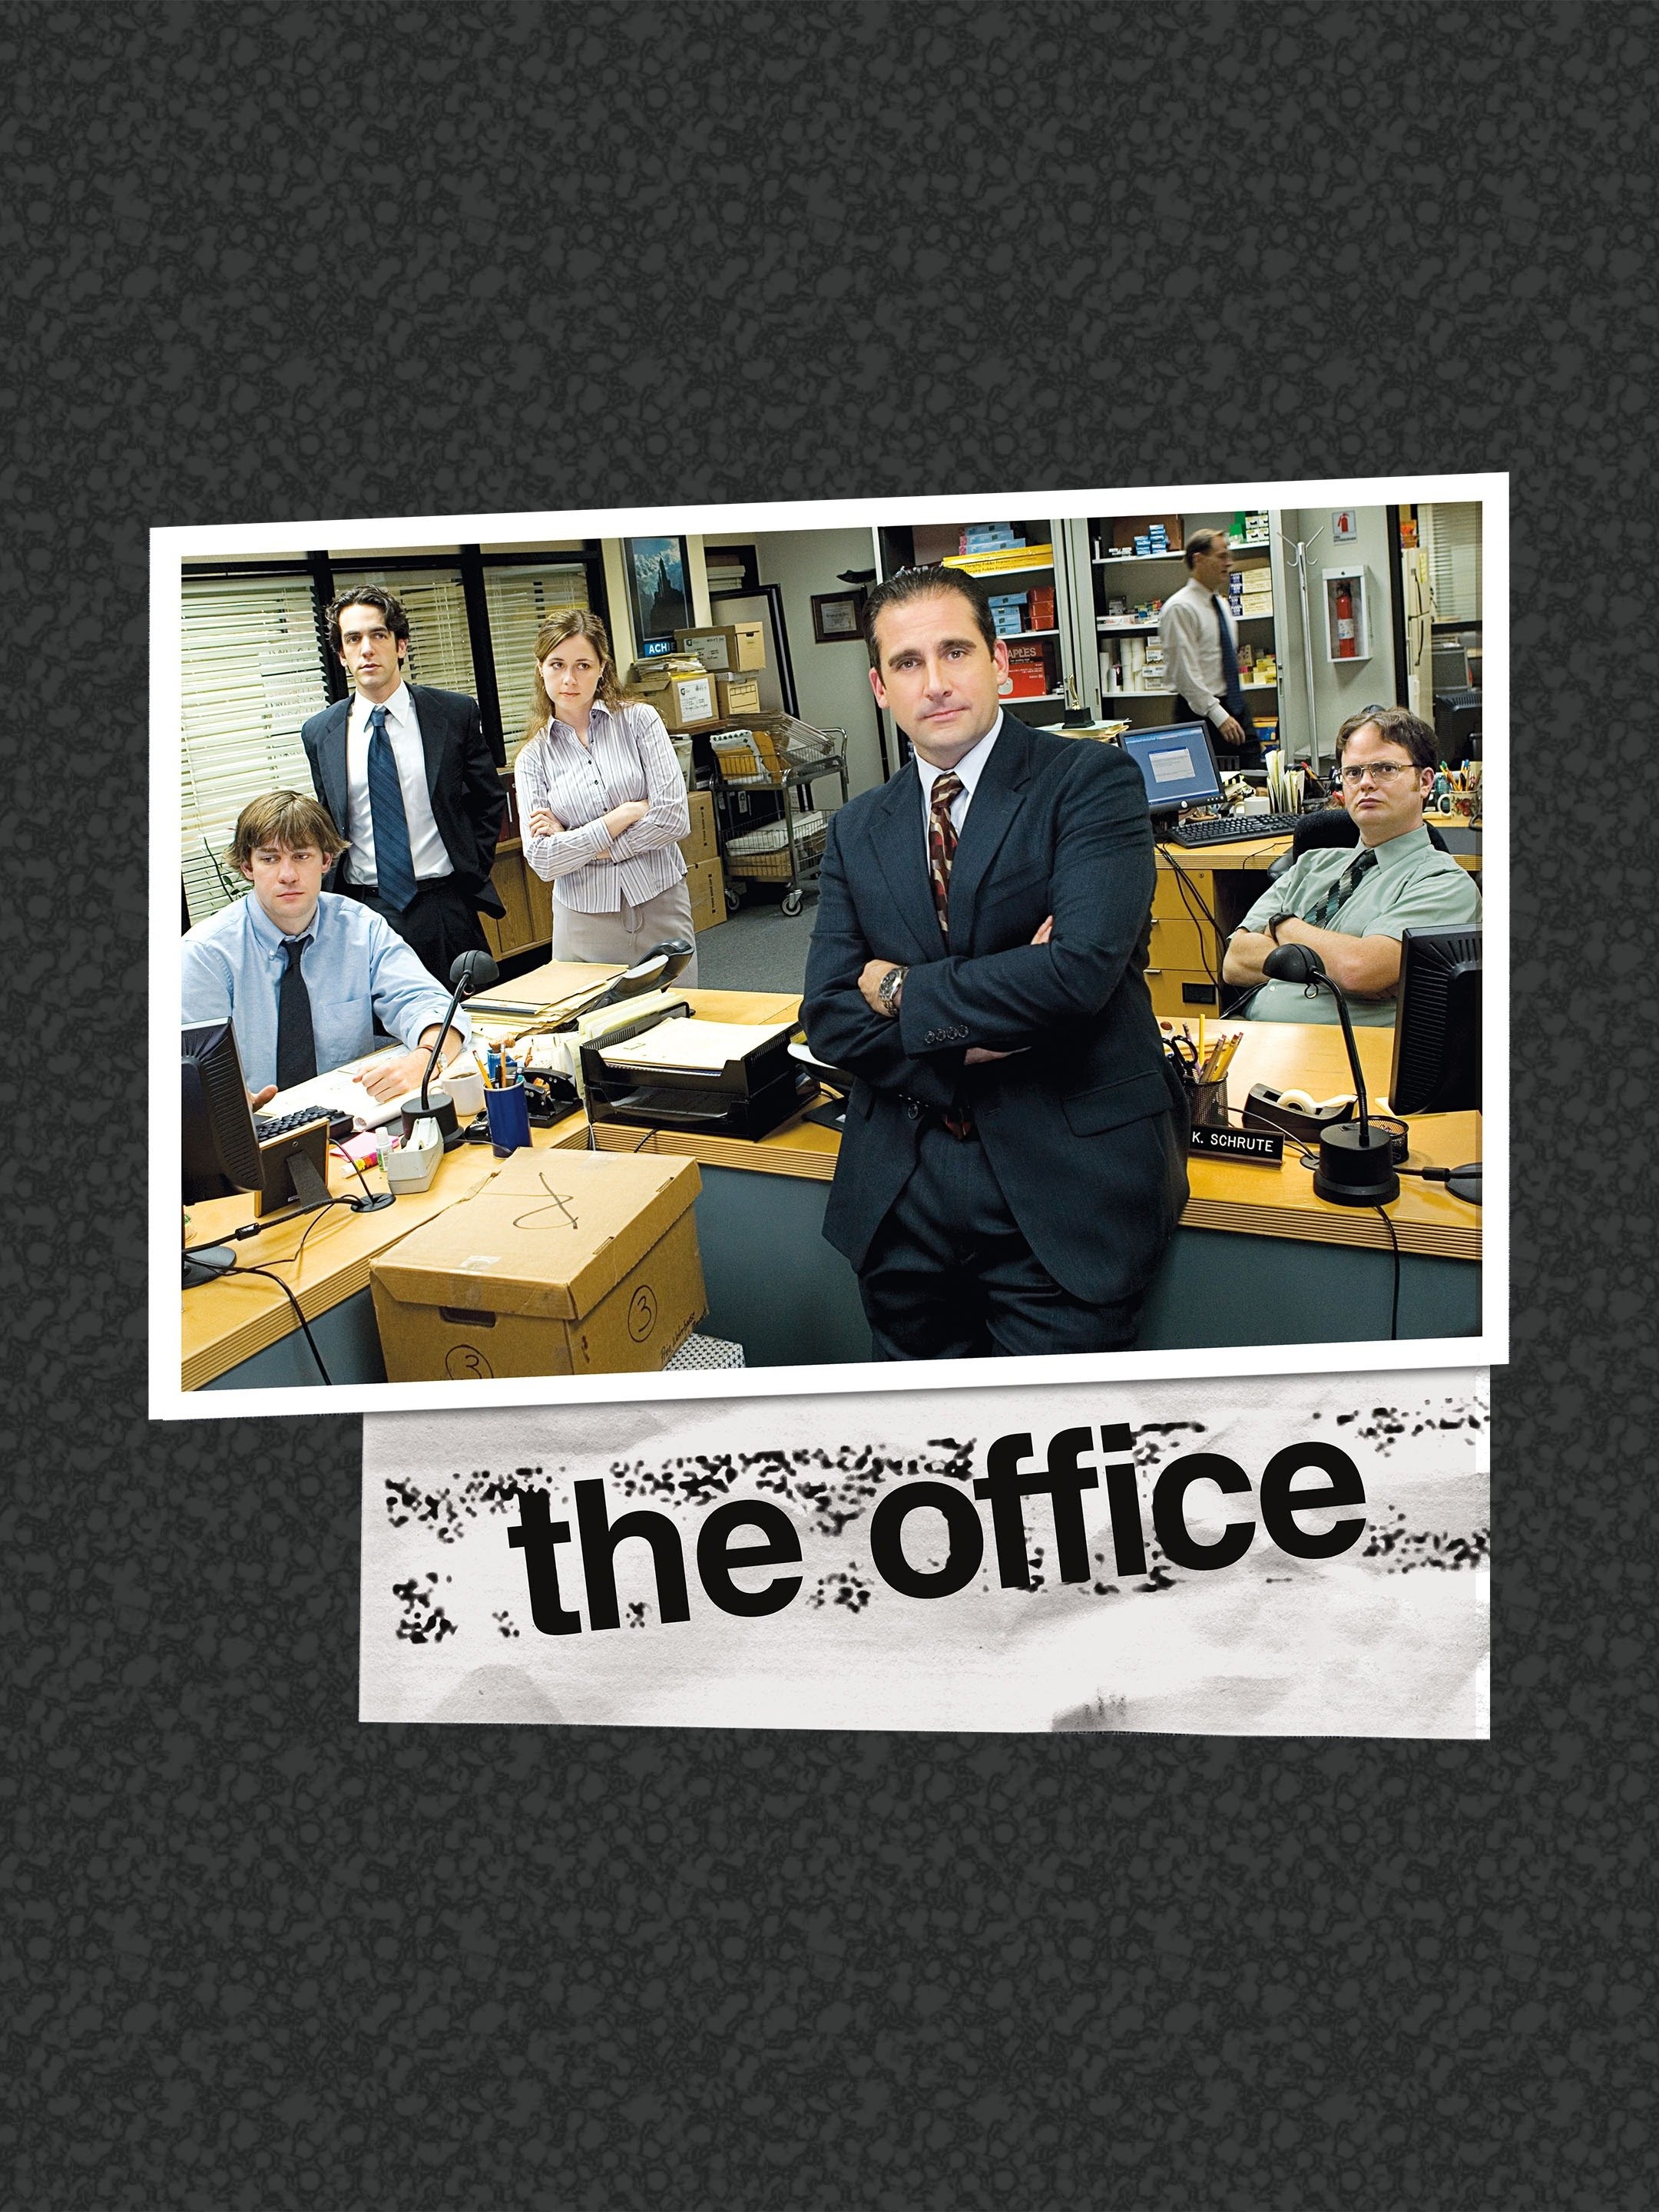 The Office Complete Series DVD – NBC Store